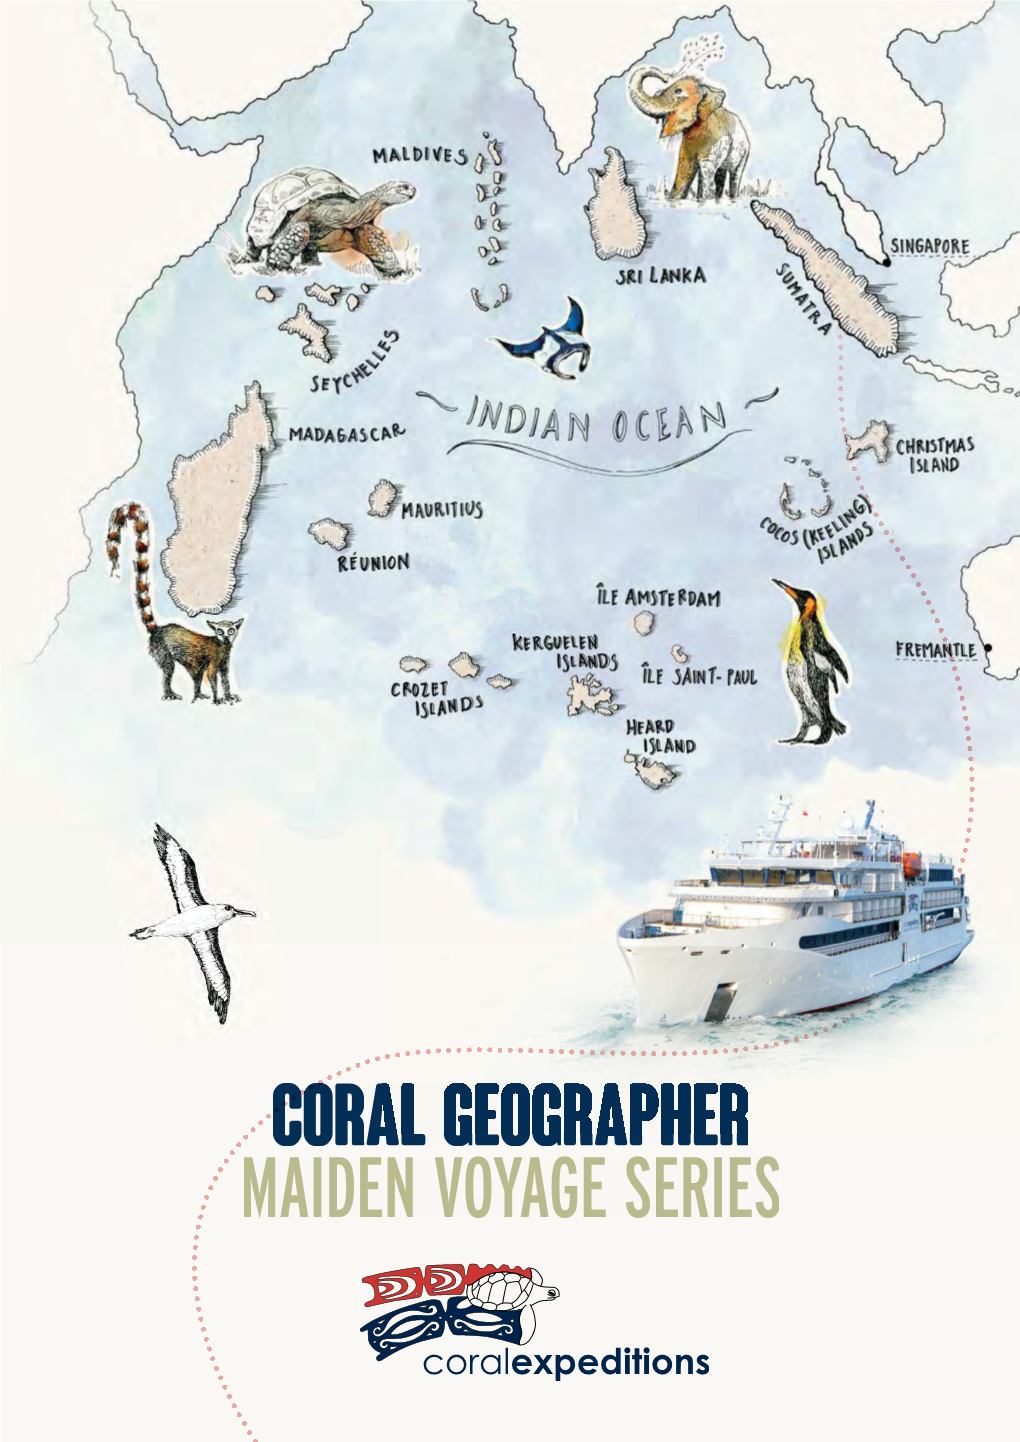 Coral Geographer MAIDEN VOYAGE SERIES Small Islands of the INDIAN OCEAN